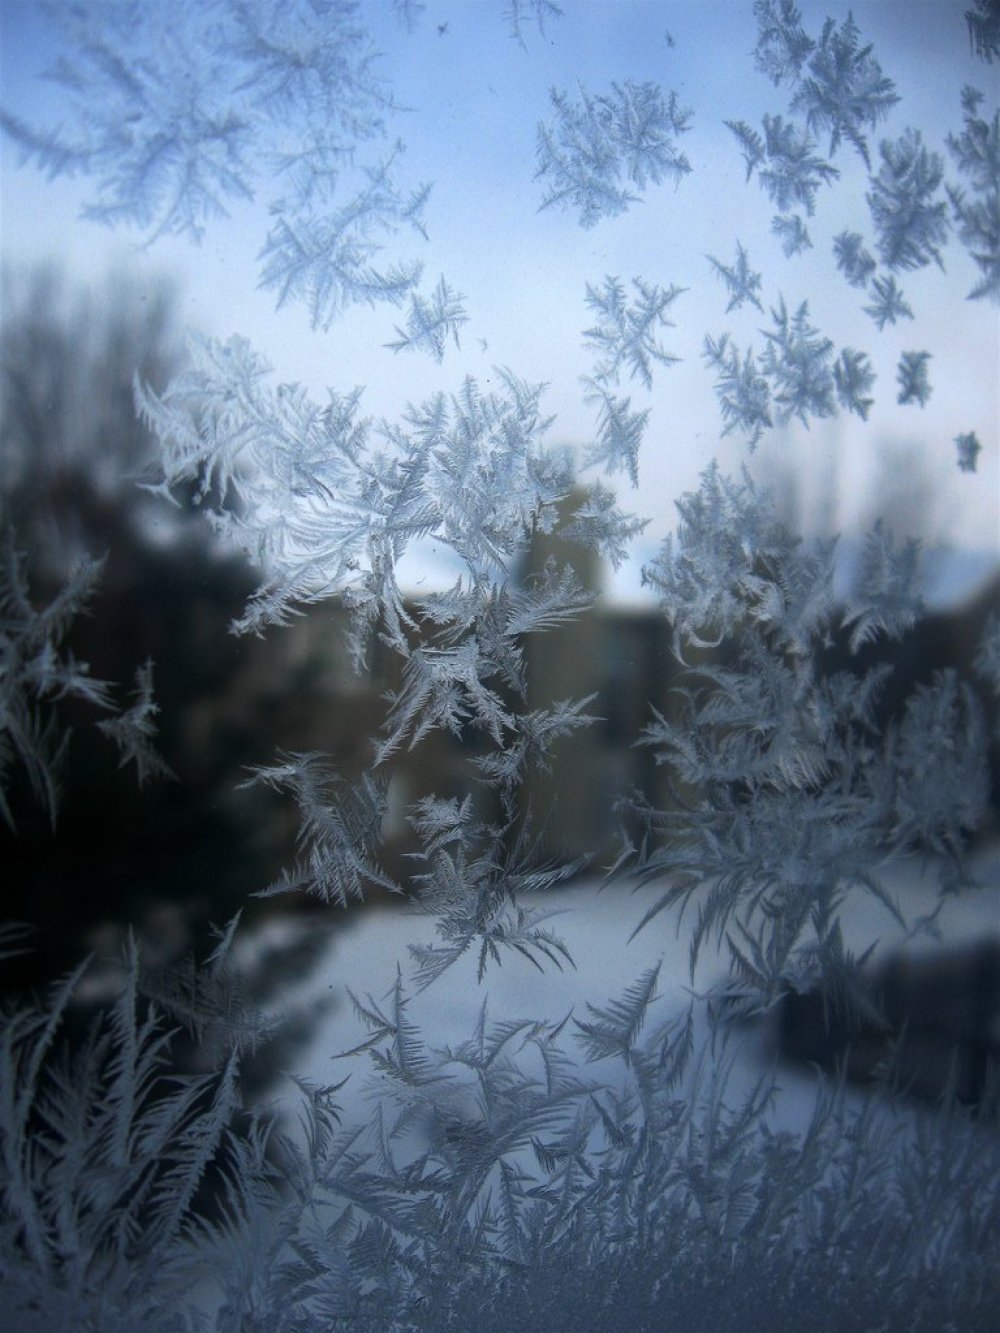  Frost on the glass: floral patterns